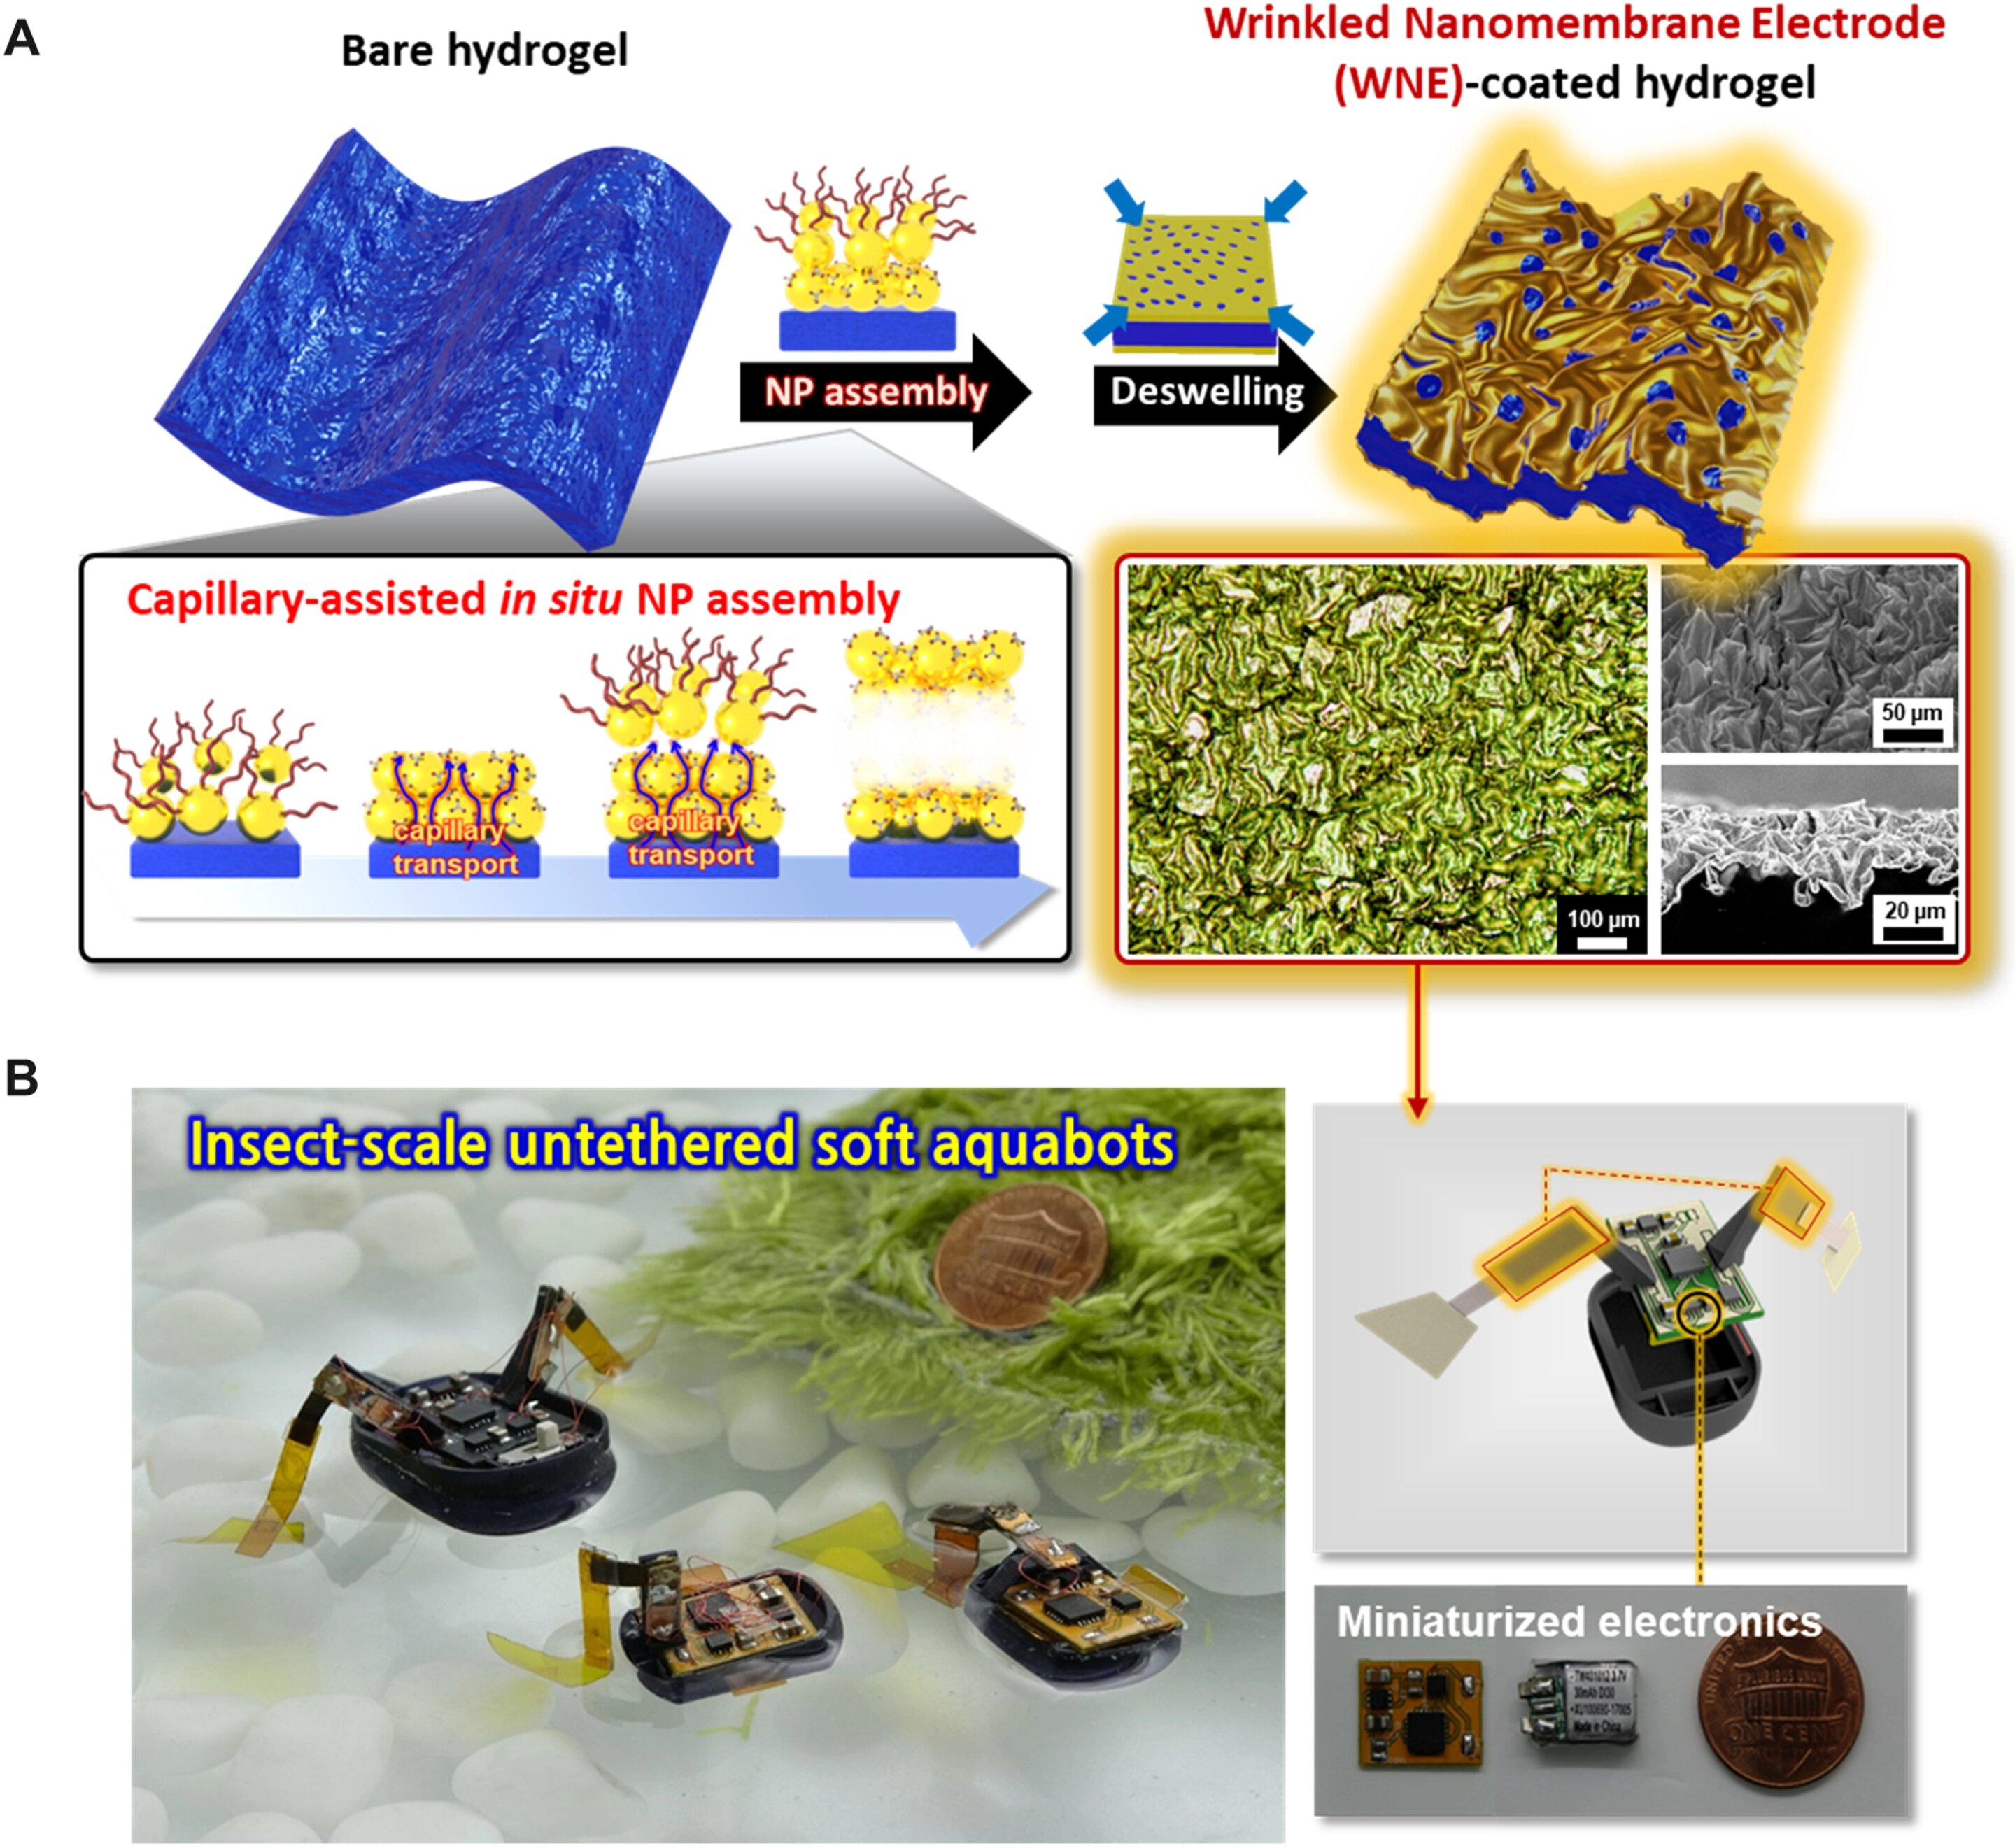 Incorporating nanoparticles into a porous hydrogel to propel an aquabot with minimal voltage